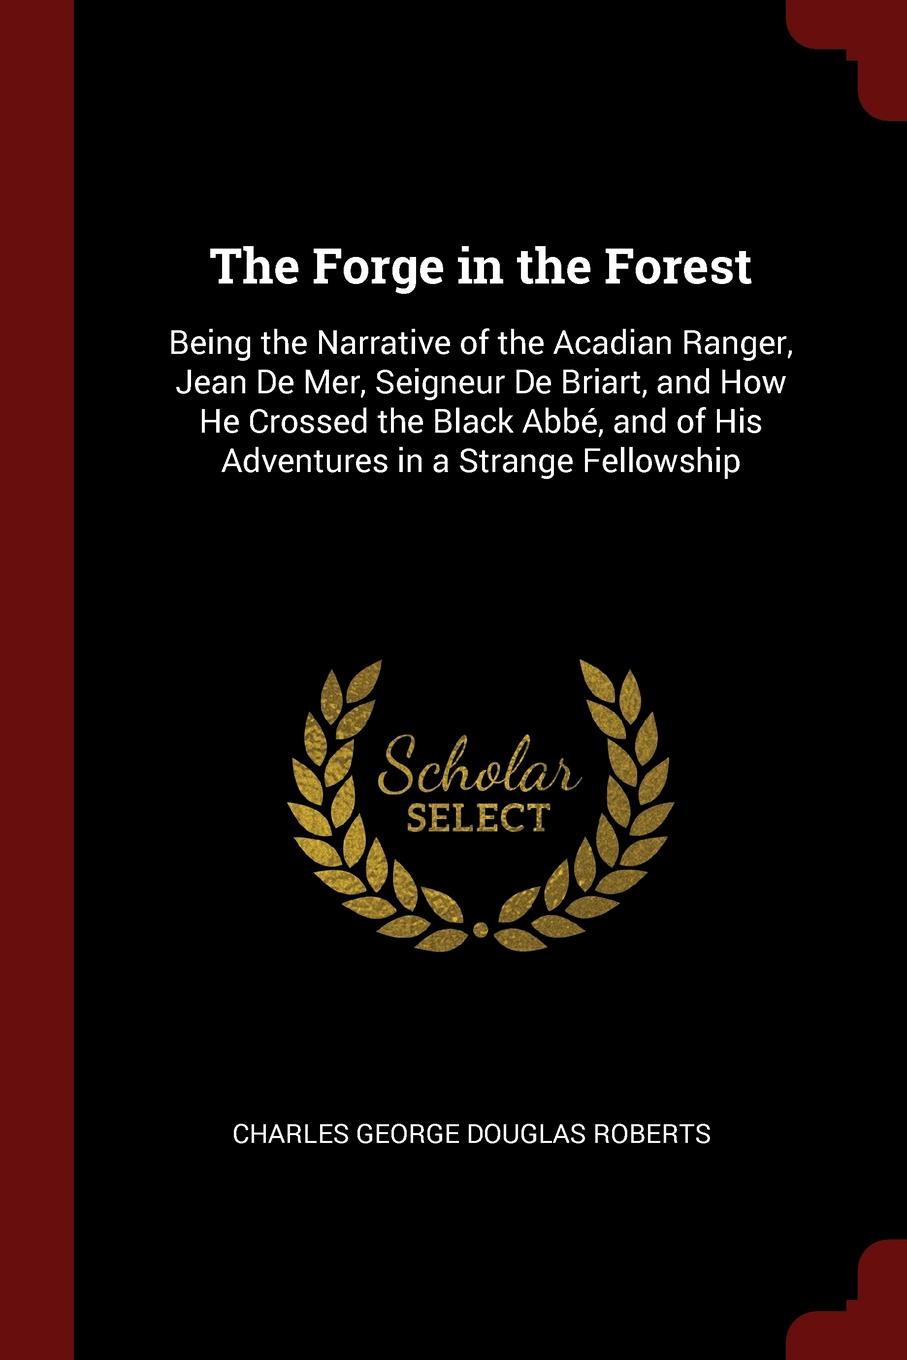 The Forge in the Forest. Being the Narrative of the Acadian Ranger, Jean De Mer, Seigneur De Briart, and How He Crossed the Black Abbe, and of His Adventures in a Strange Fellowship